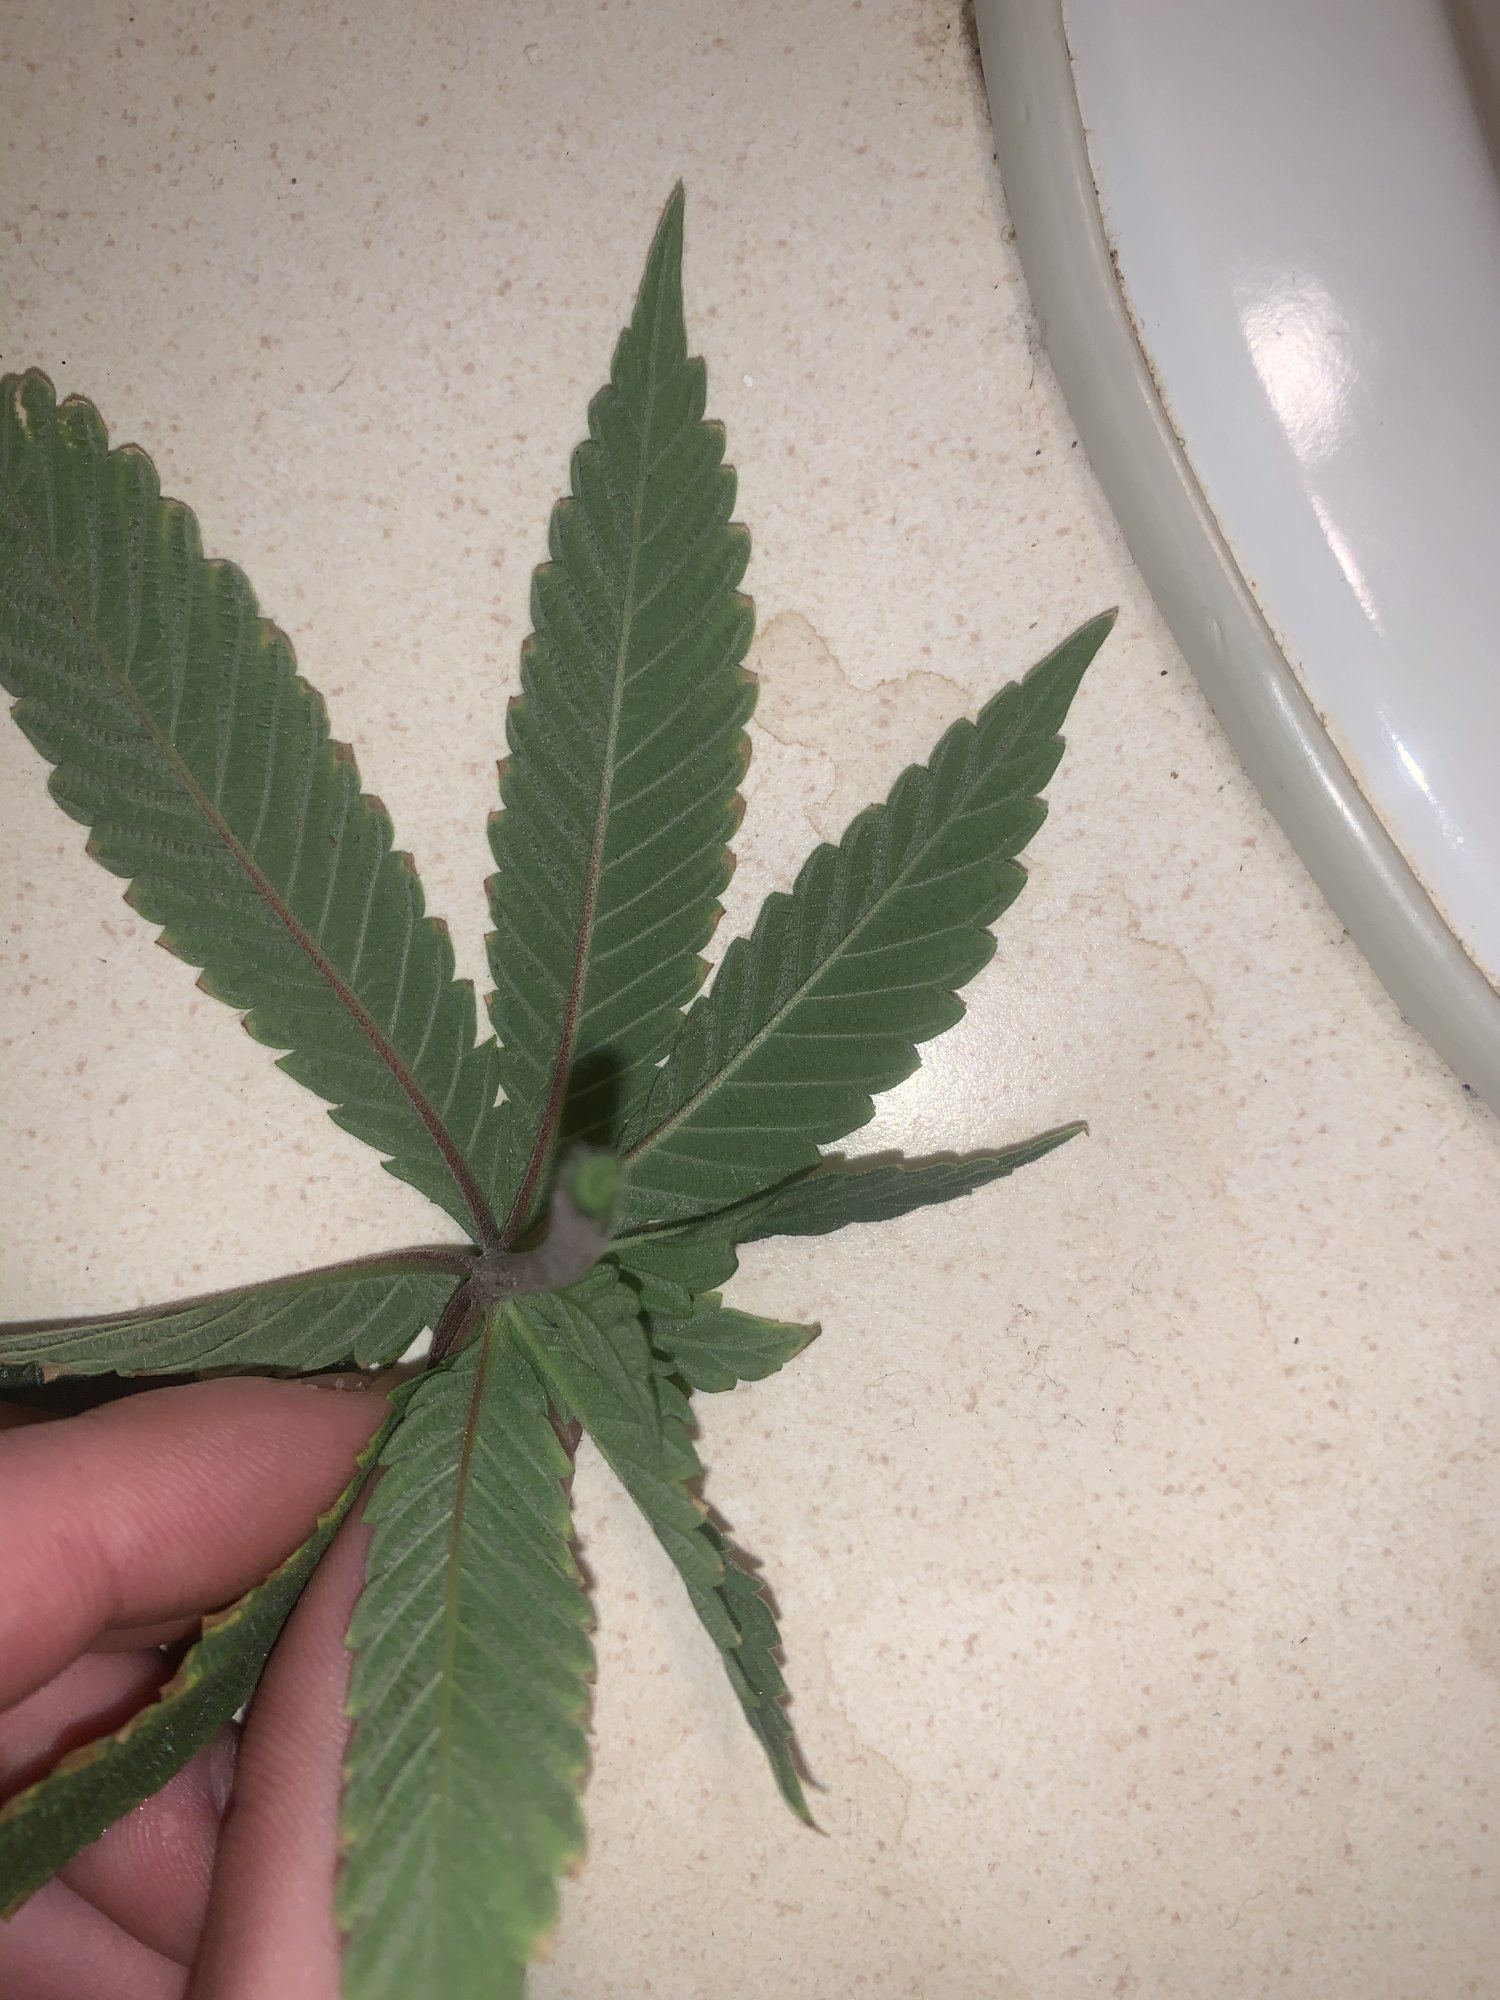 Leafs show signs of deficiency 2